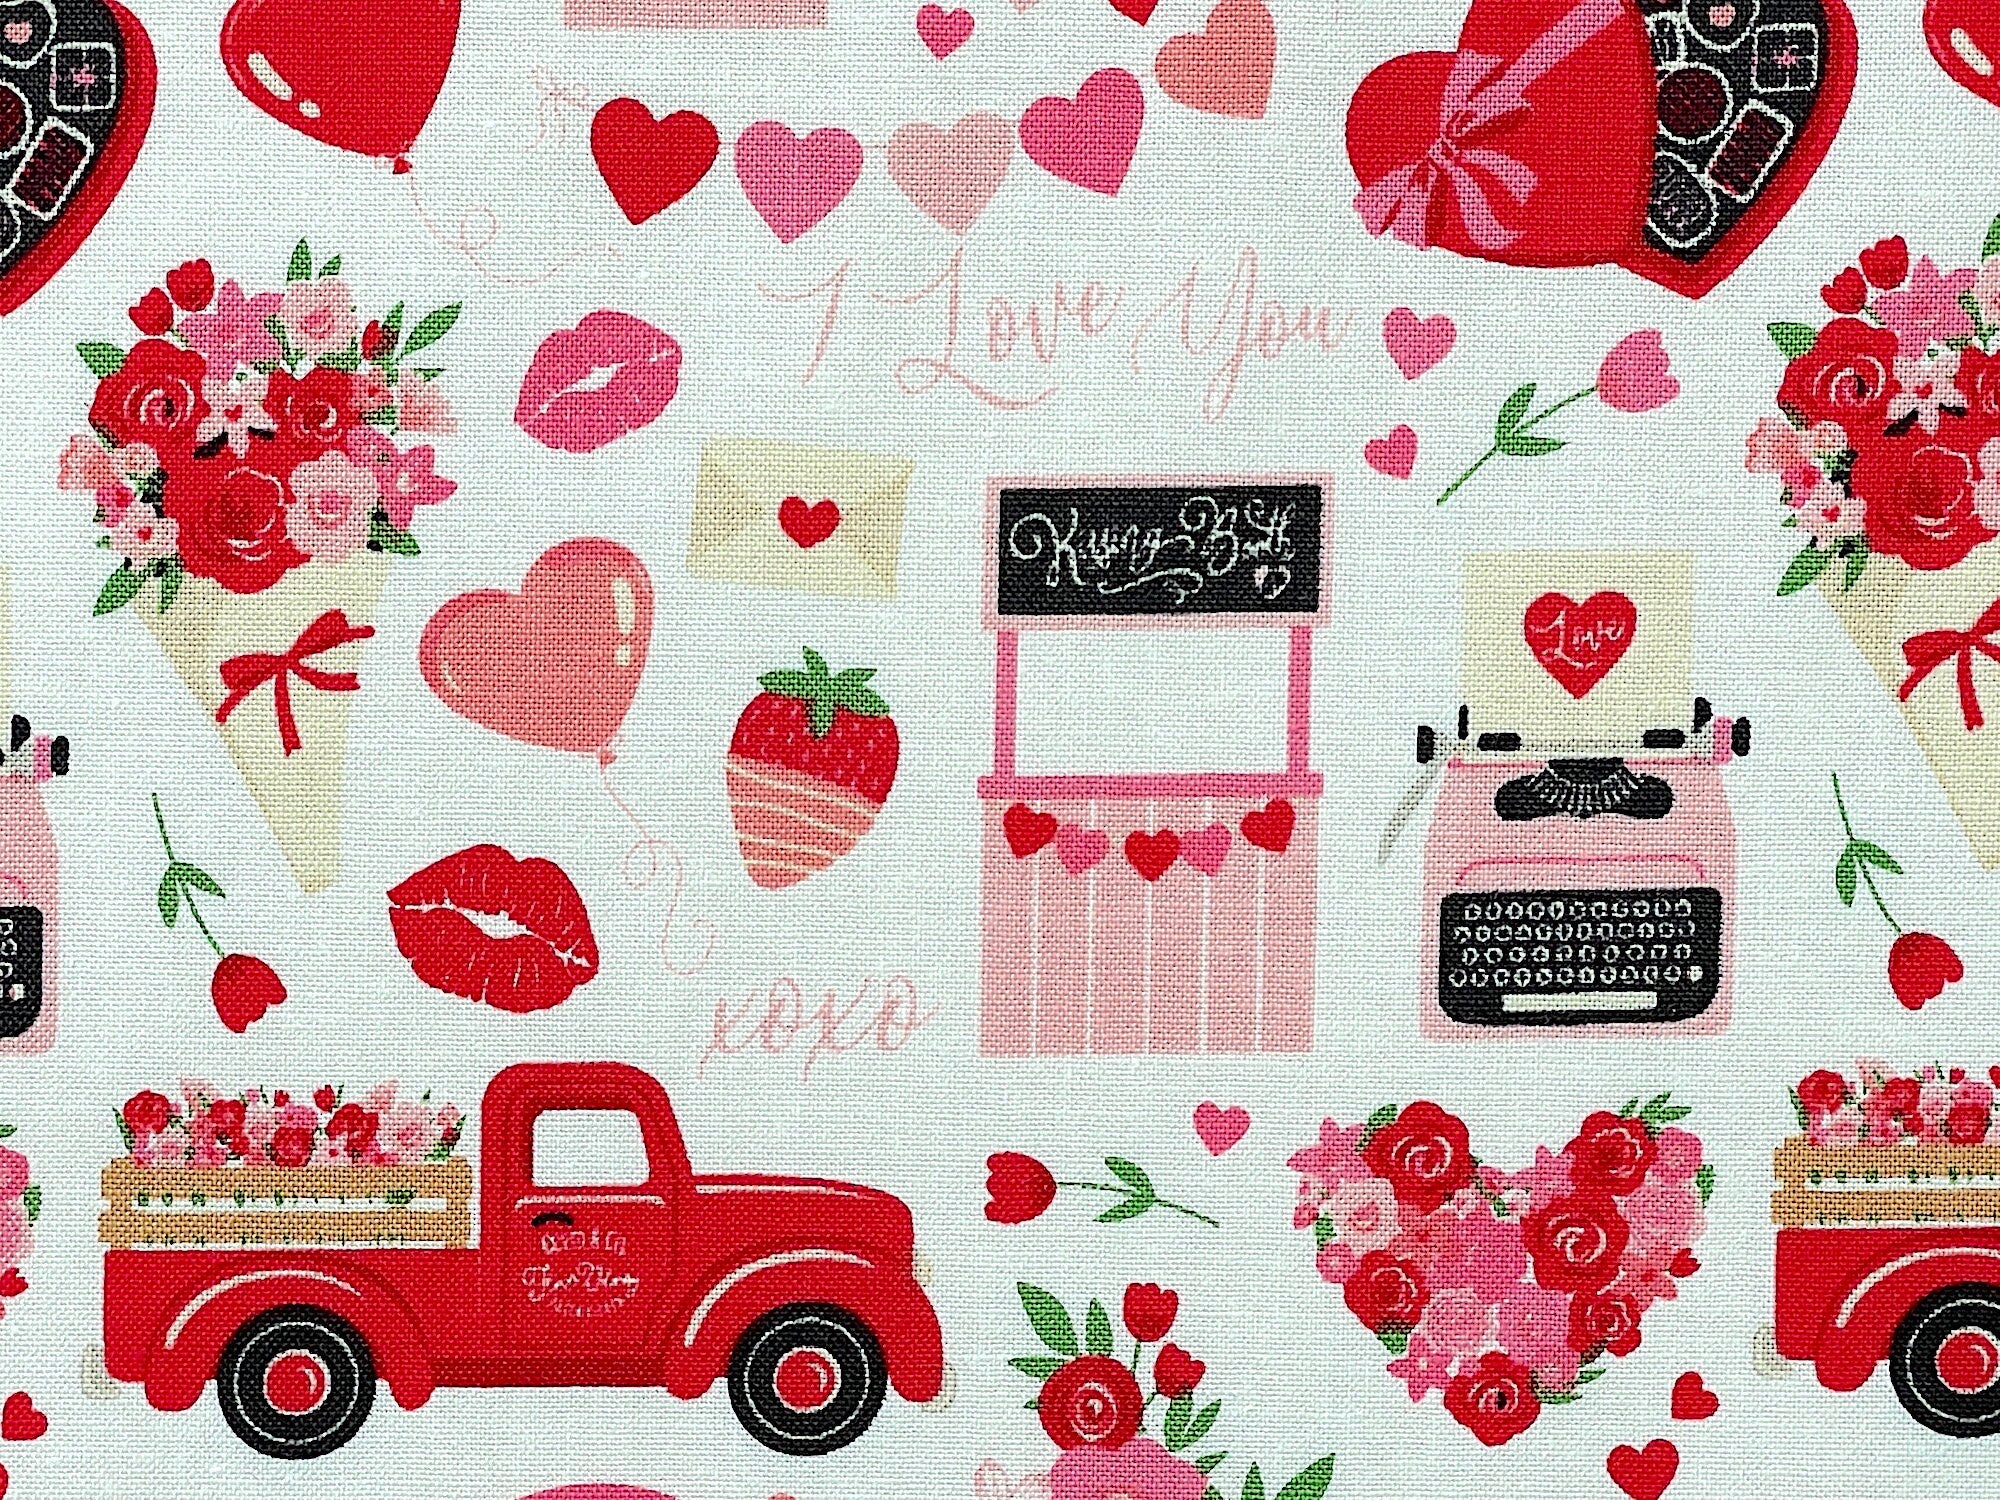 Close up of a kissing booth, red truck hearts, candy, love letters, hearts and more.